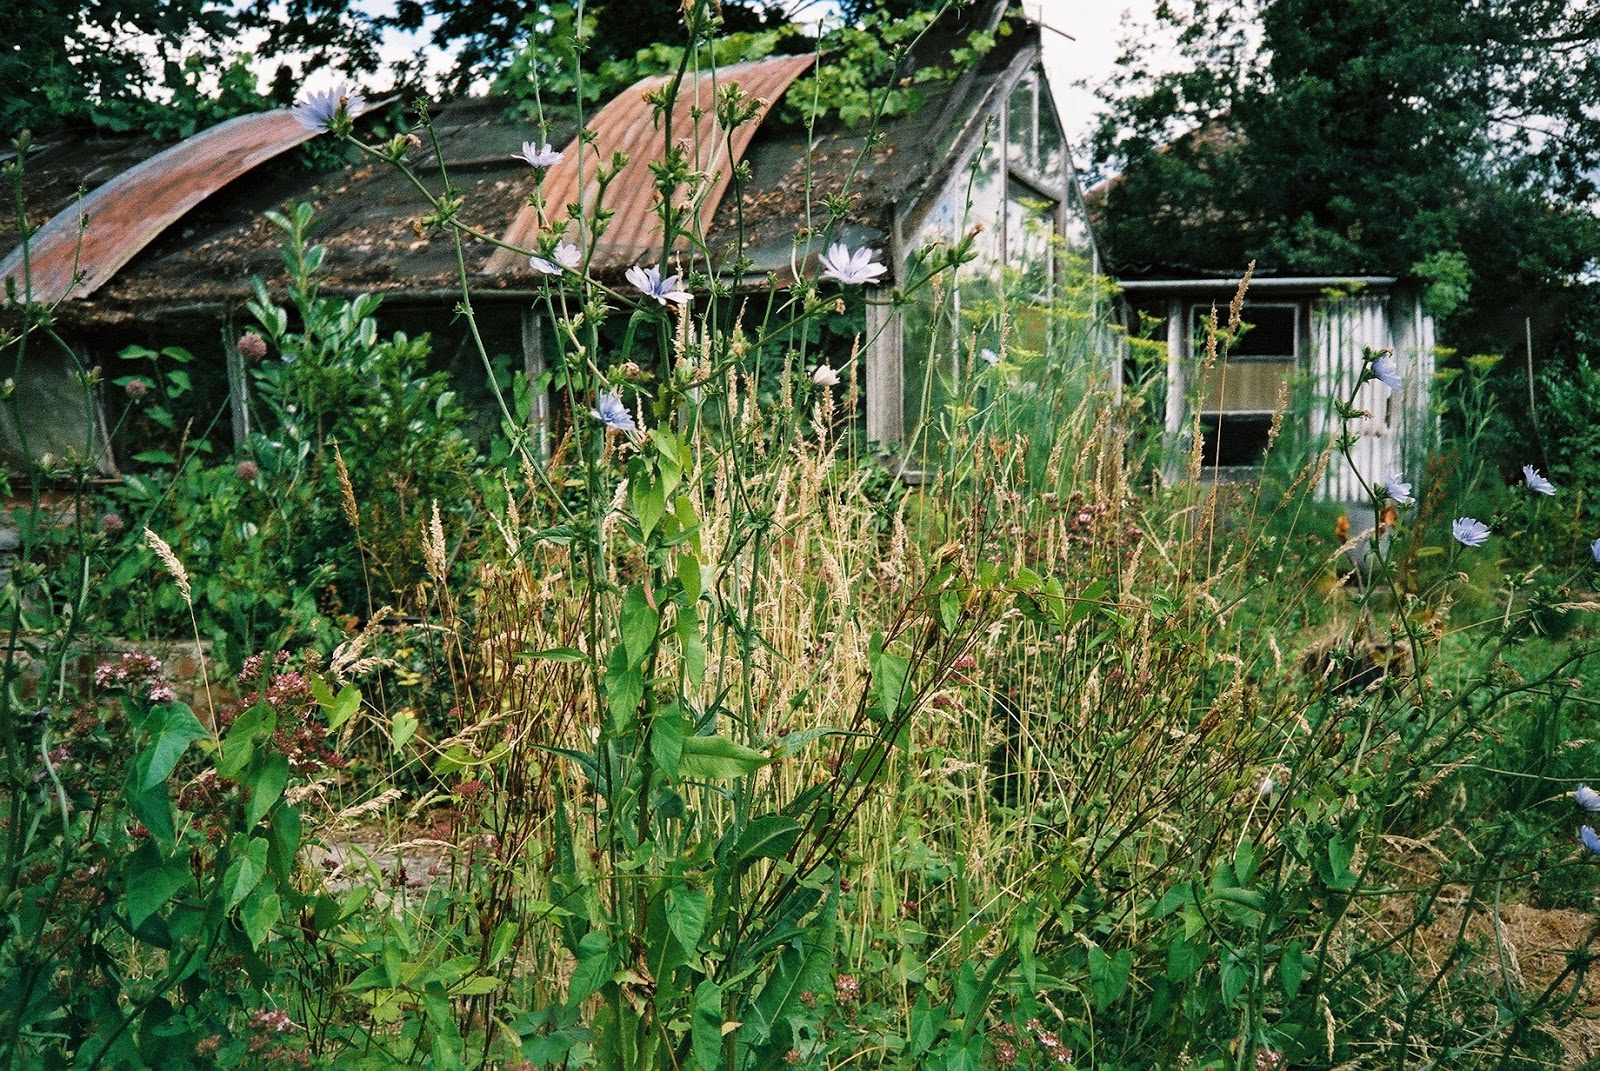 WILD FLOWERS, SUBURBAN FOARGING, FENNEL, CHICORY, MARGORAM, DERELICT BUILDINGS, SUBURBIA, CORRUGATED IRON ROOF, © VAC 100 DAYS 4 MILLION CONVERSATIONS, 2015 GENERAL ELECTION